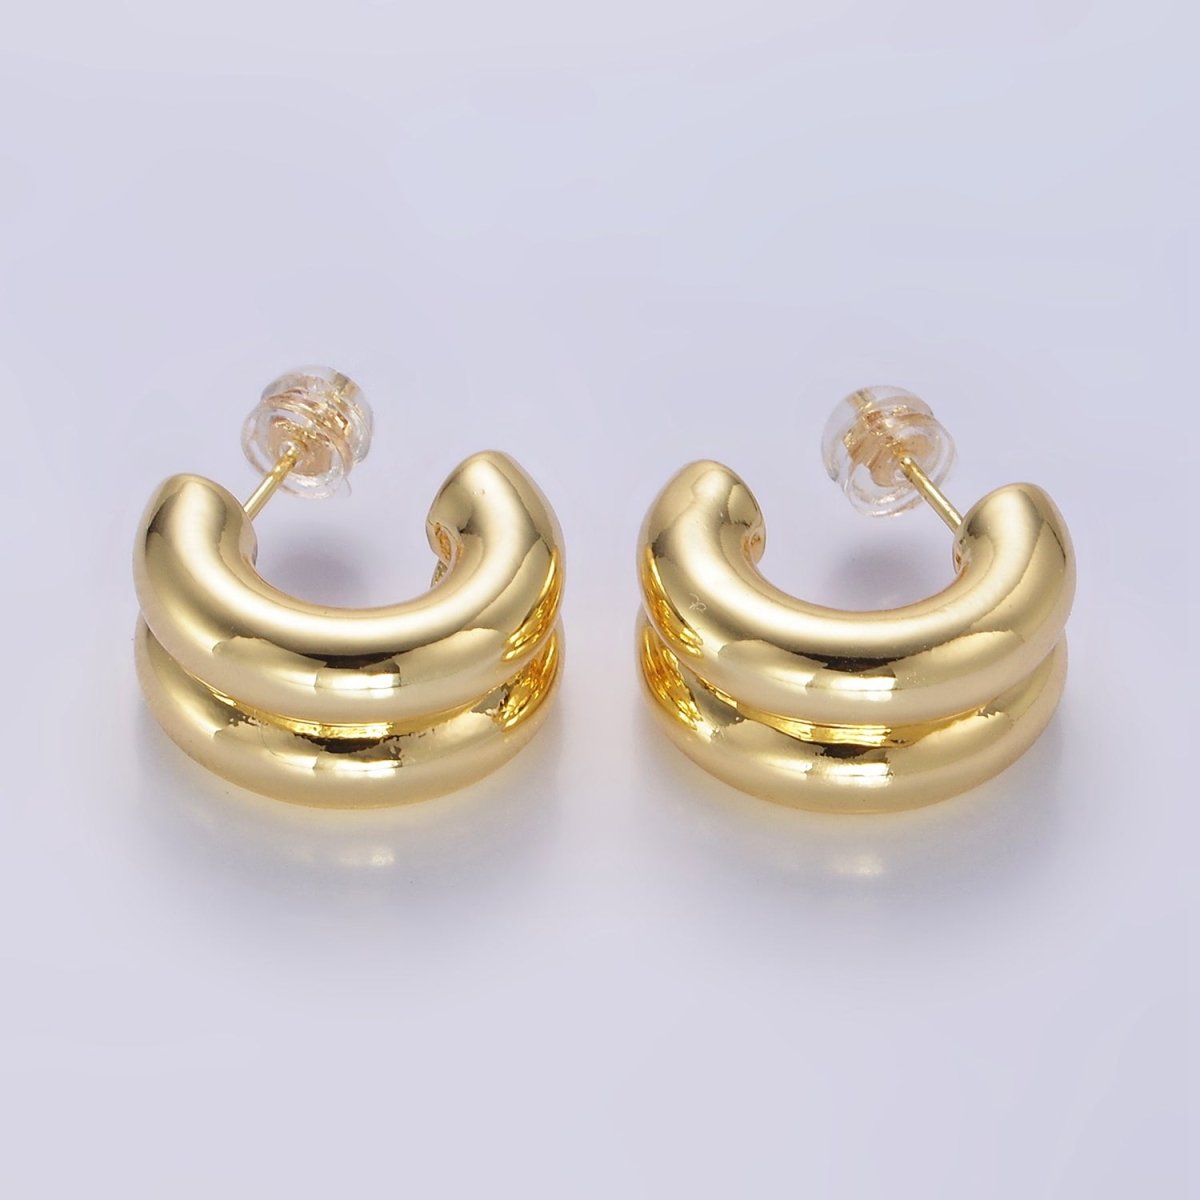 24K Gold Filled Double Band C - Shaped Hoop Earrings in Gold, Silver & Mixed Metal | T316 T317 - DLUXCA